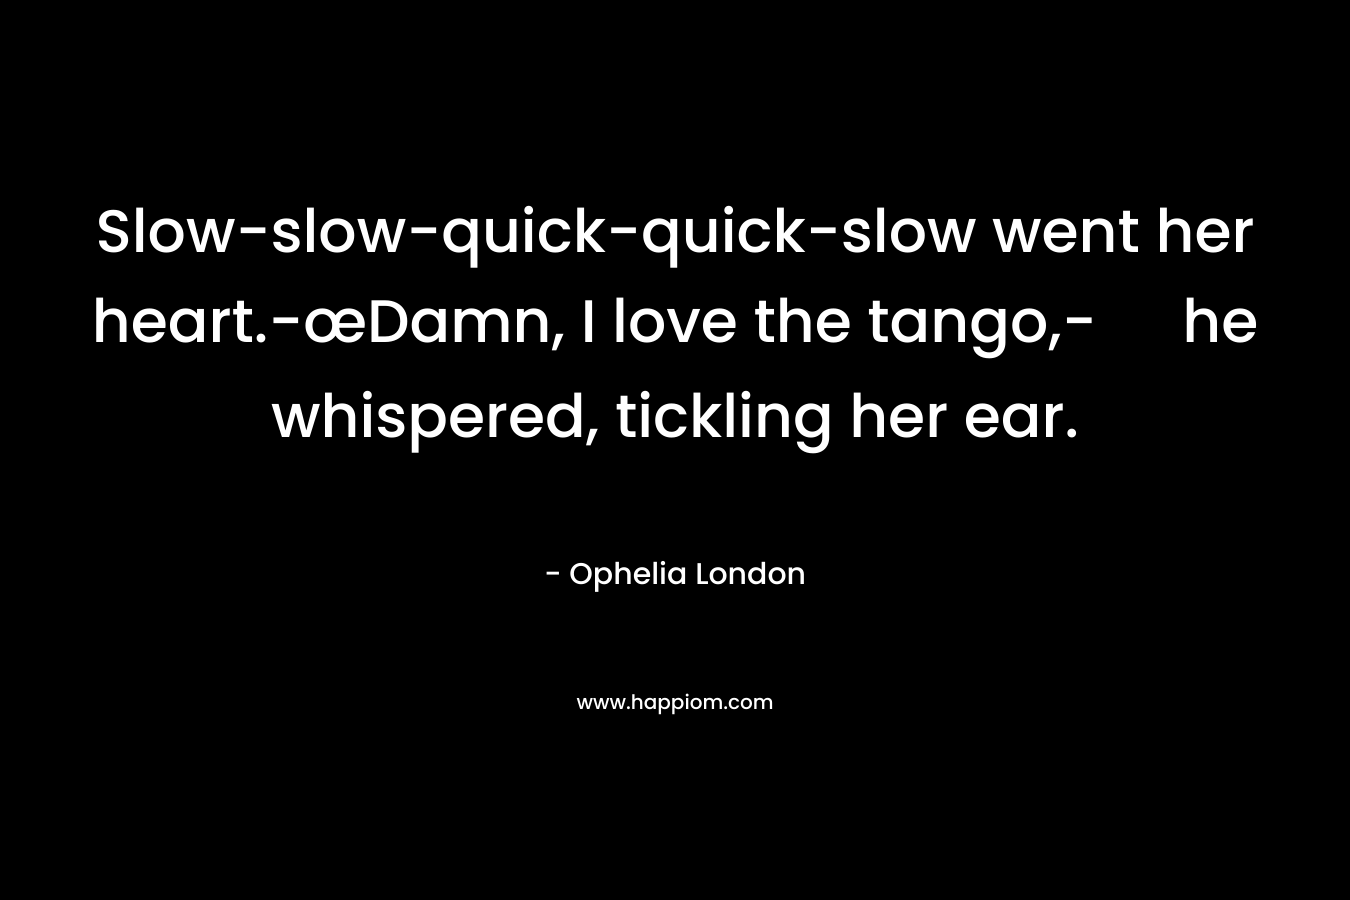 Slow-slow-quick-quick-slow went her heart.-œDamn, I love the tango,- he whispered, tickling her ear. – Ophelia London